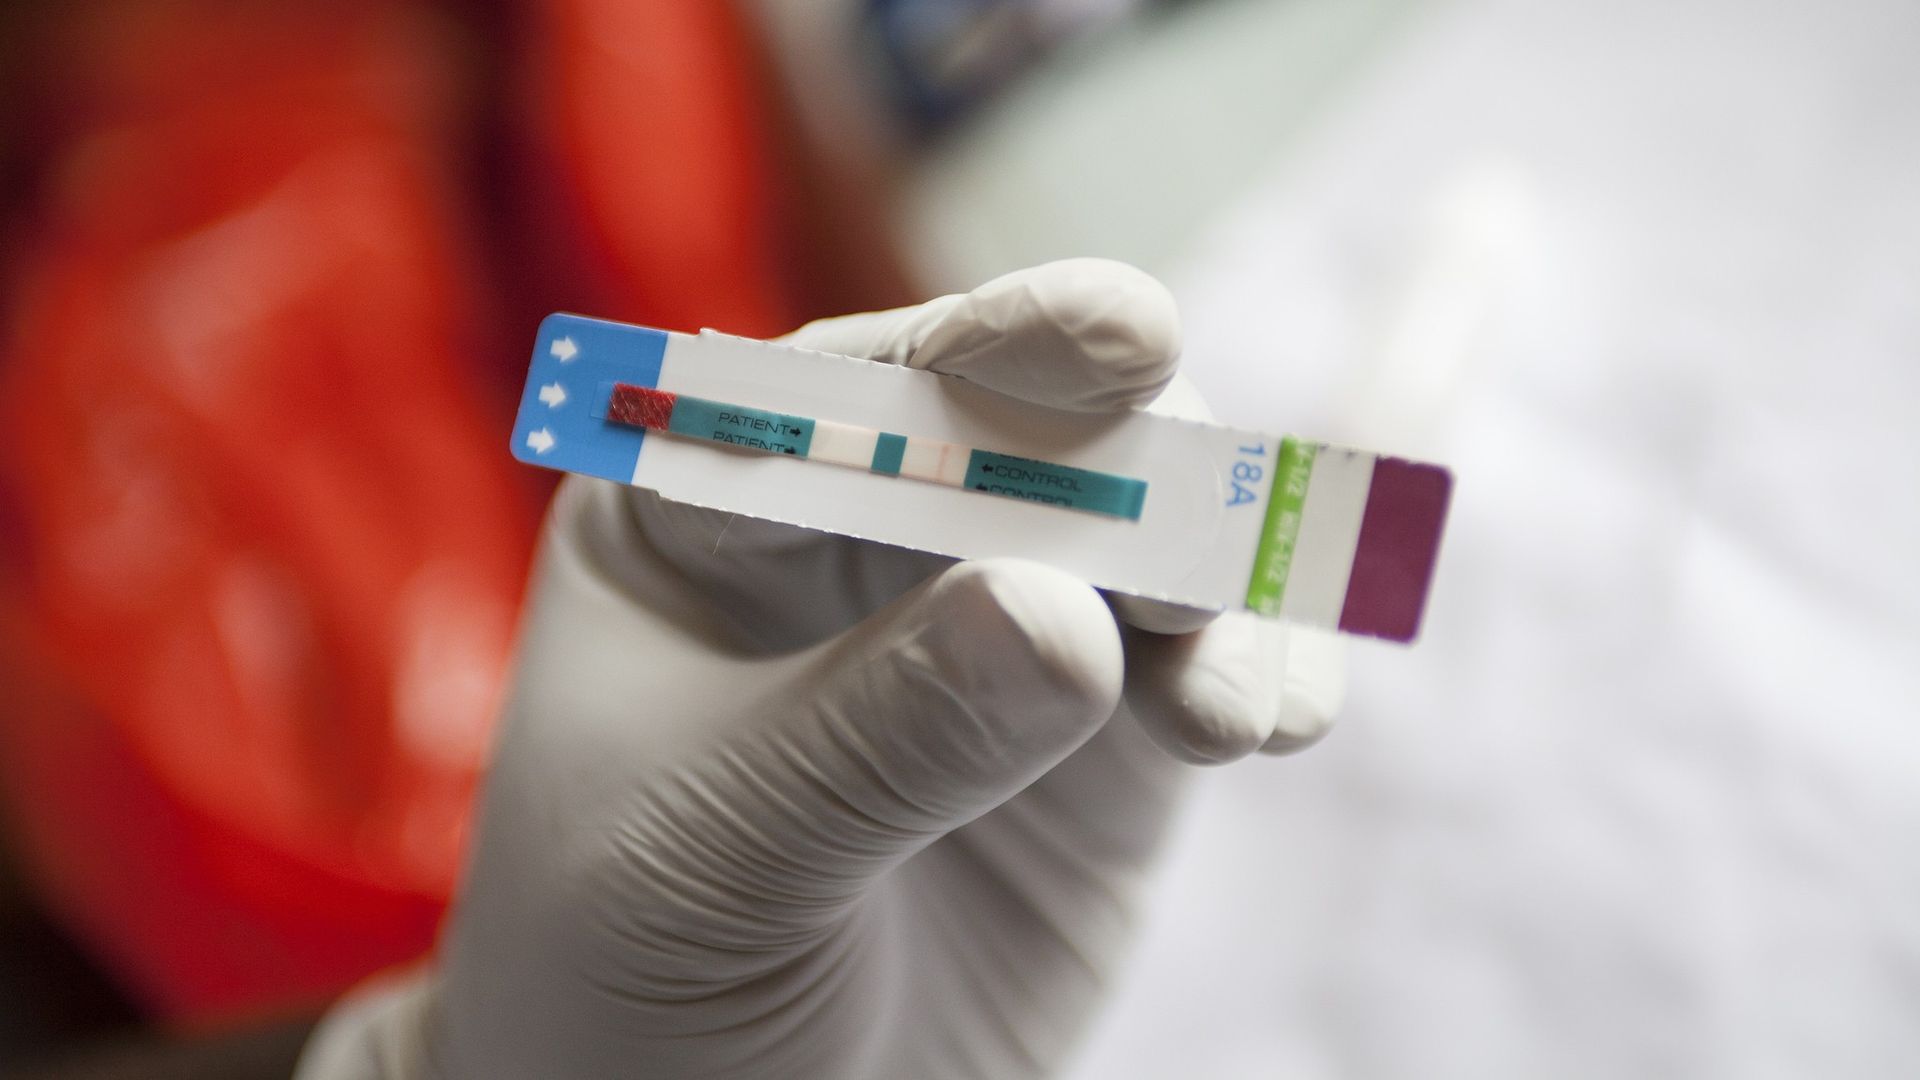 TakeMeHome HIV Test Kits Critical In Ending HIV Epidemic In The US